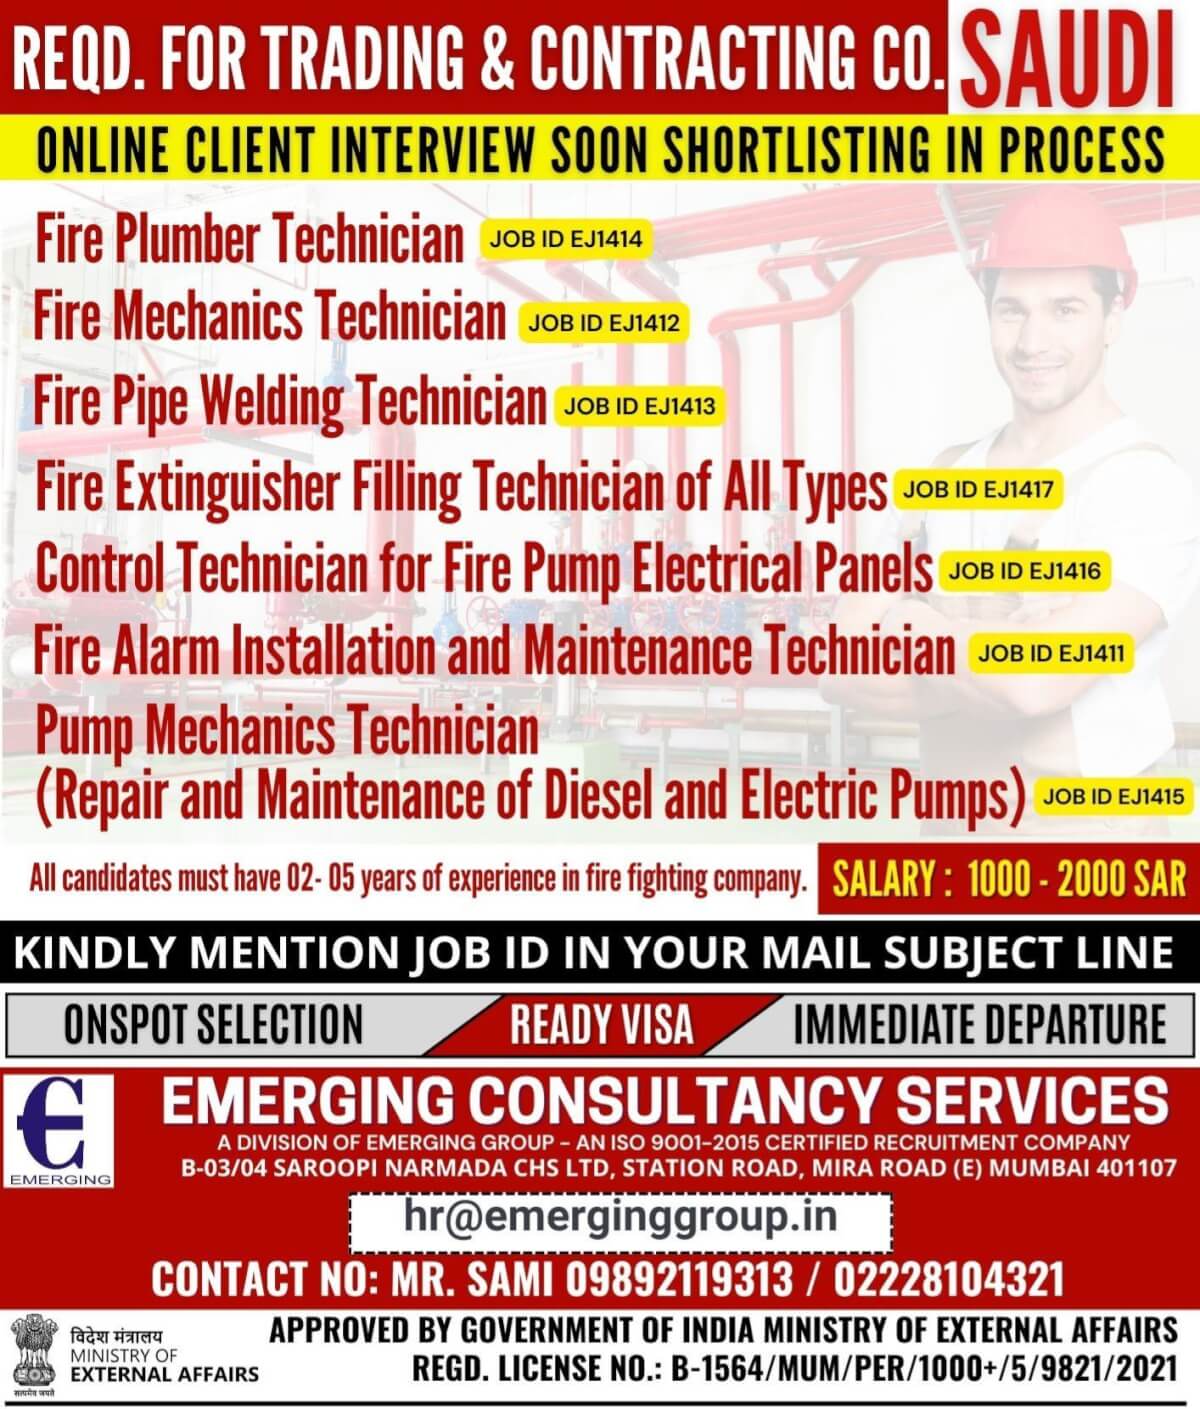 URGENTLY REQUIRED FOR TRADING &  CONTRACTING COMPANY IN SAUDI ARABIA